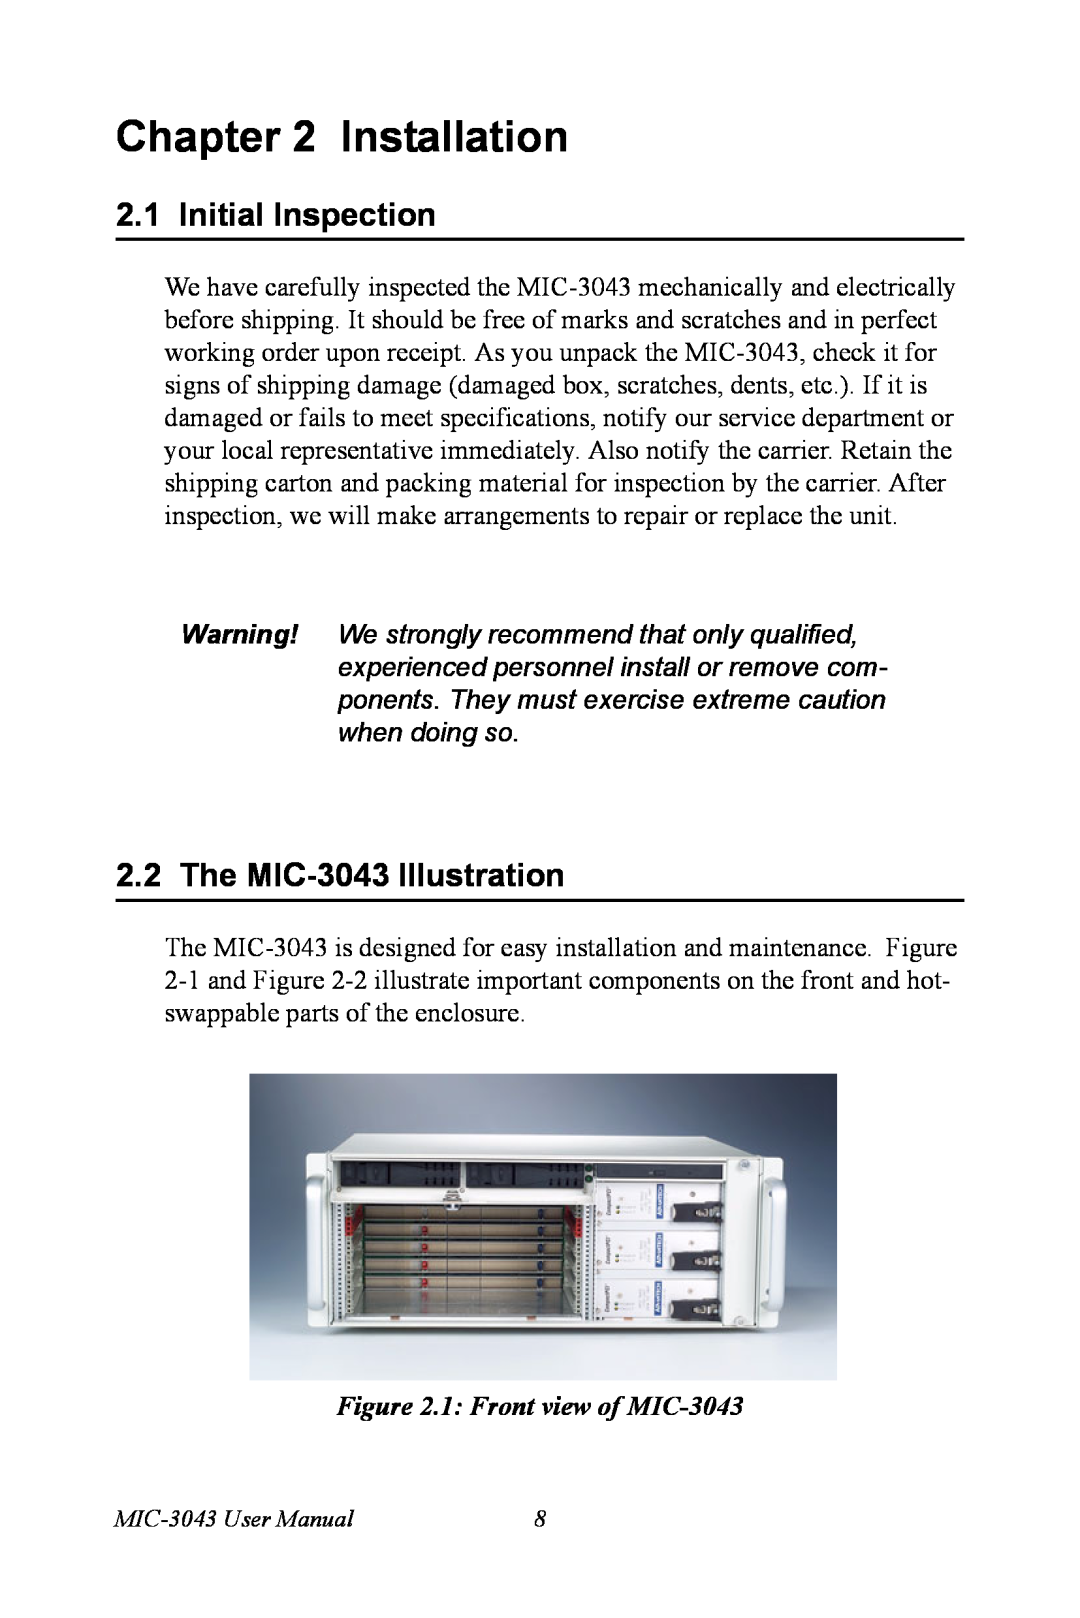 Advantech user manual Installation, Initial Inspection, The MIC-3043 Illustration, 1 Front view of MIC-3043 